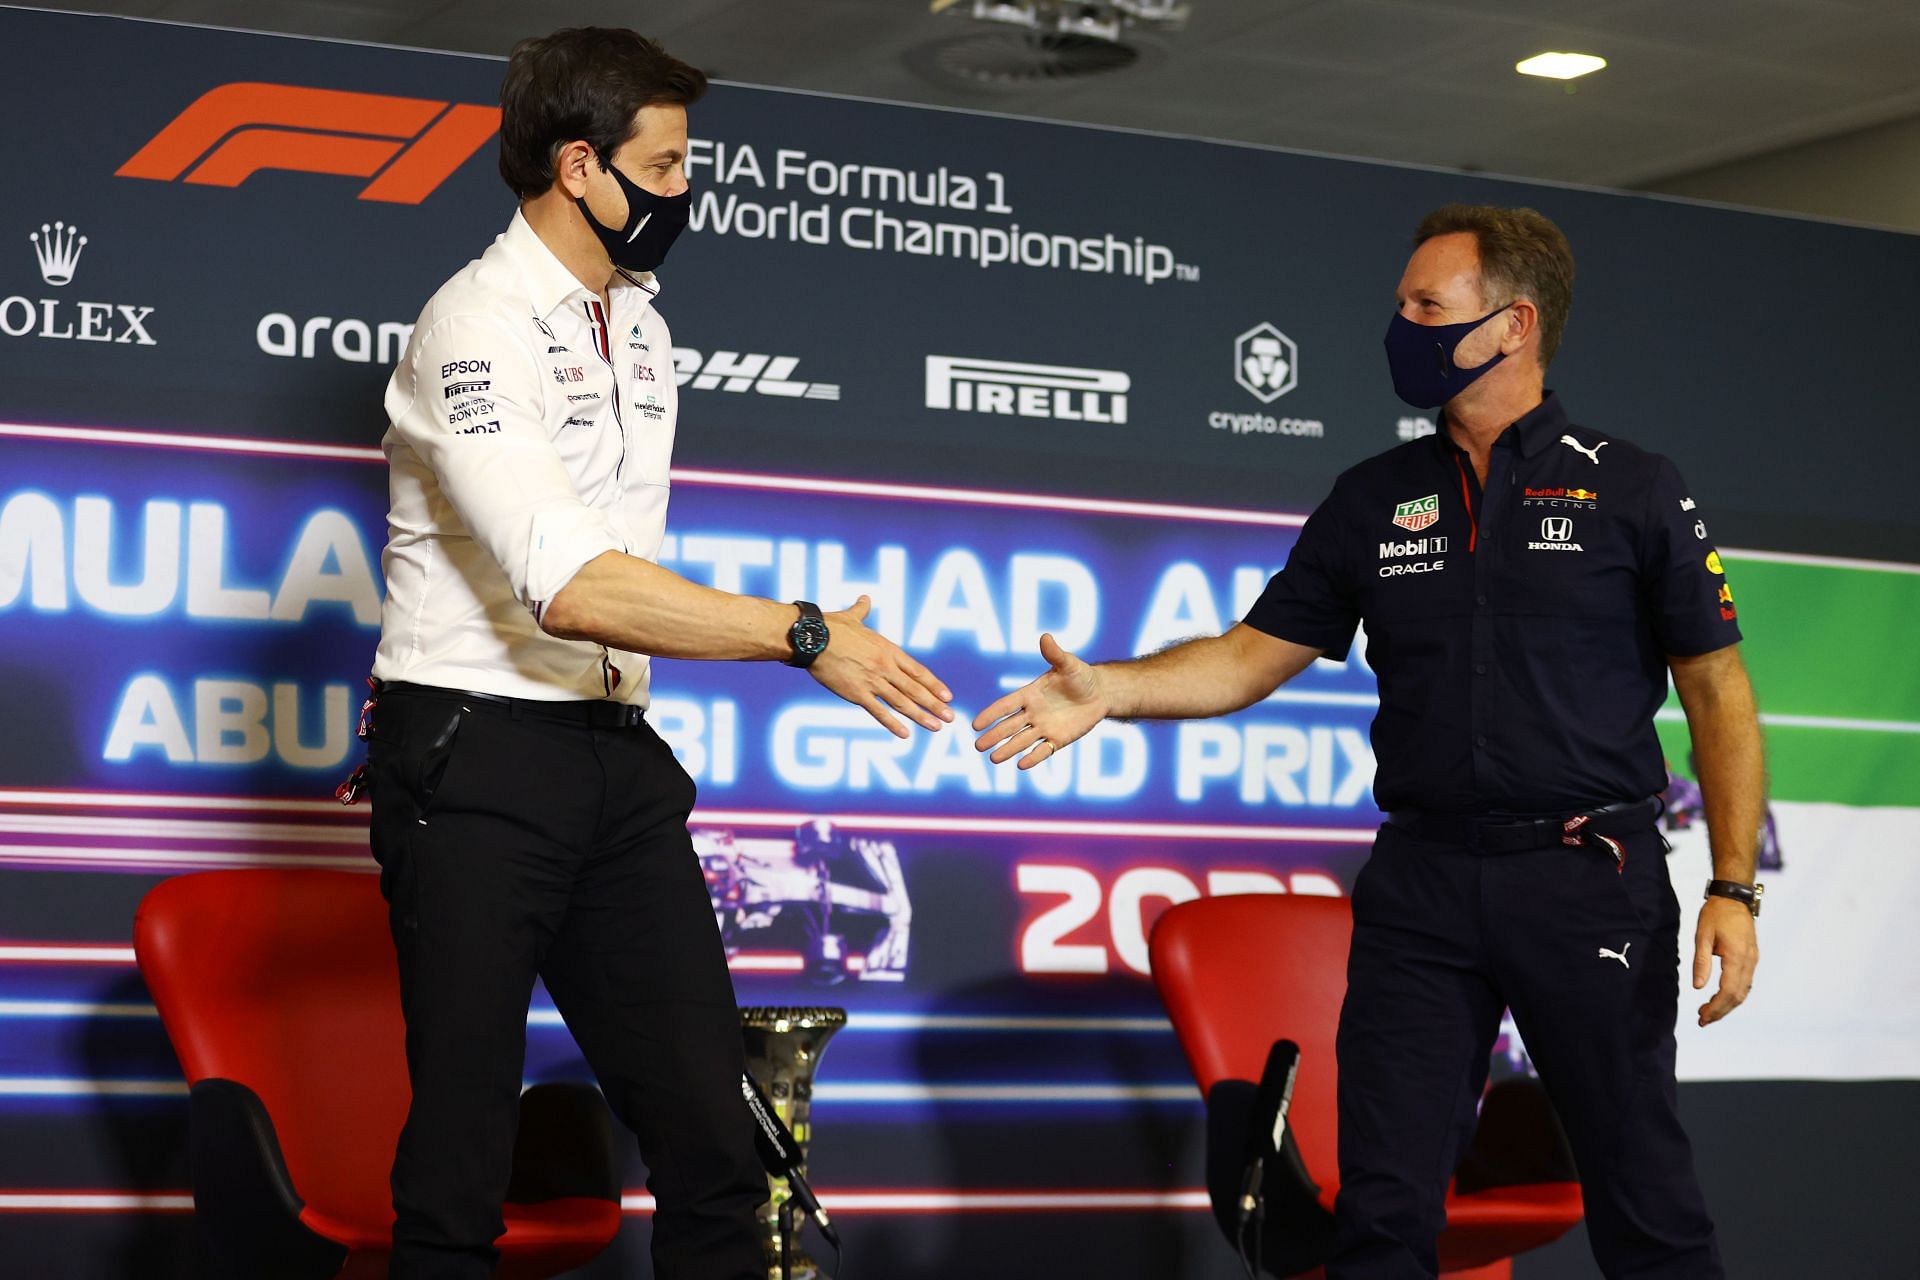 Toto Wolff (left) and Christian Horner (right) before the 2021 Abu Dhabi Grand Prix (Photo by Bryn Lennon/Getty Images)